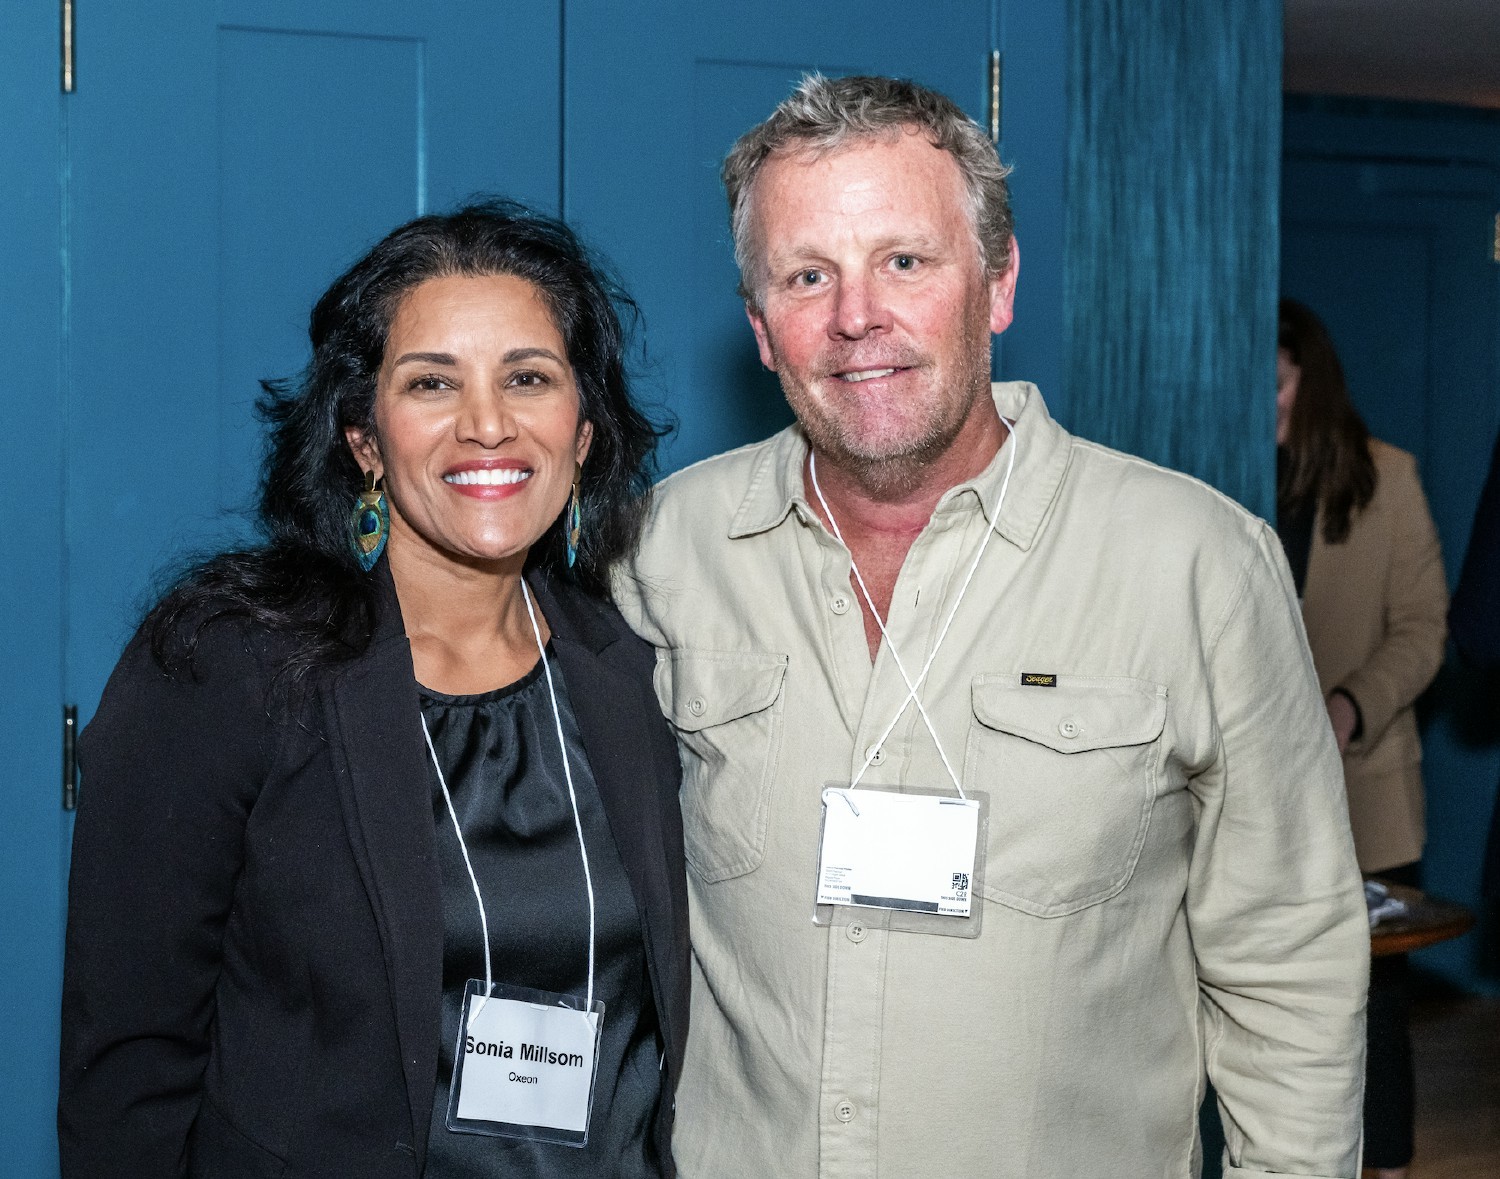 CEO, Sonia Millsom with Founder and Chairman, Trevor Price